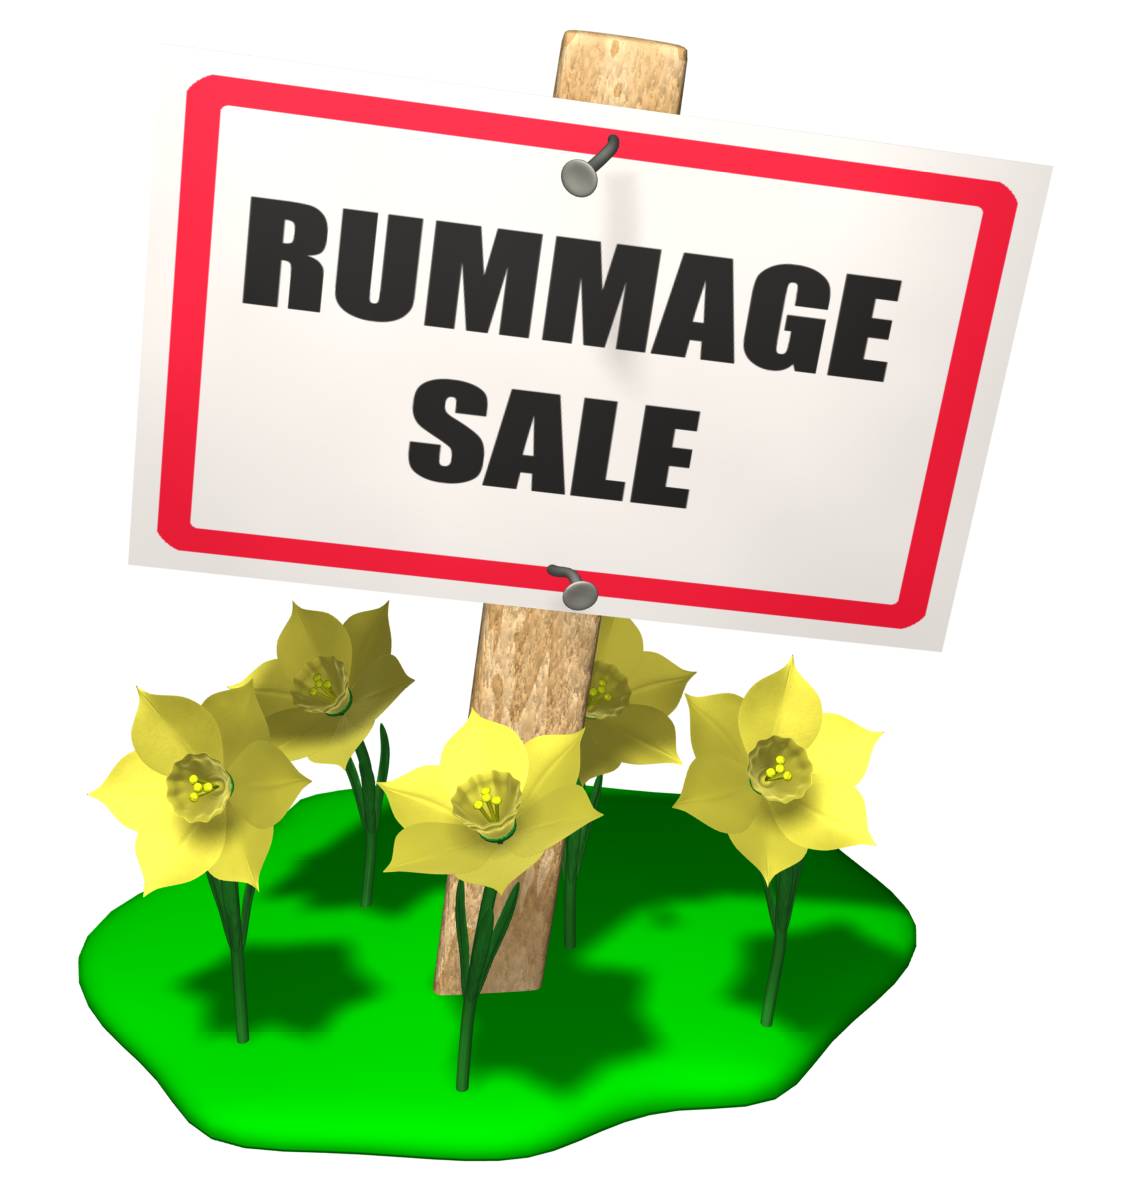 Free Rummage Sale Clipart, Download Free Clip Art, Free Clip Art on.